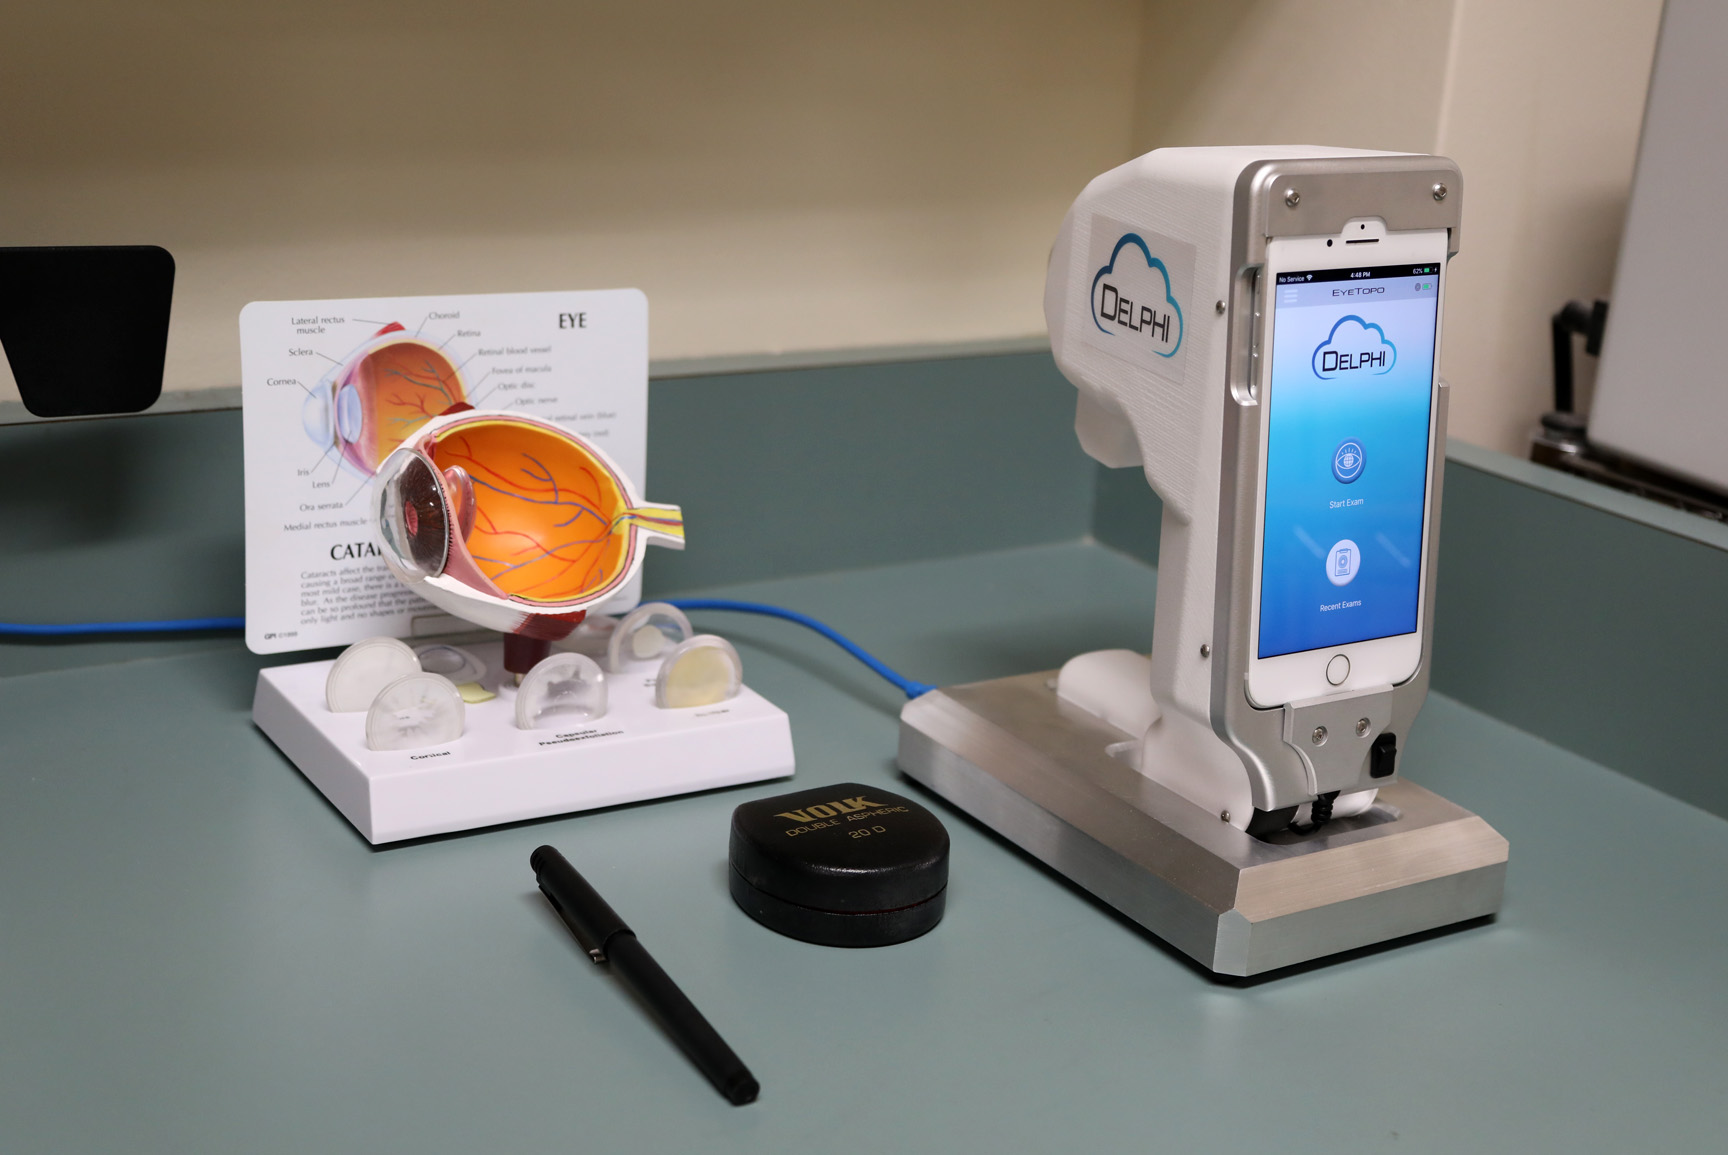 Delphi, a smartphone-based corneal topography system